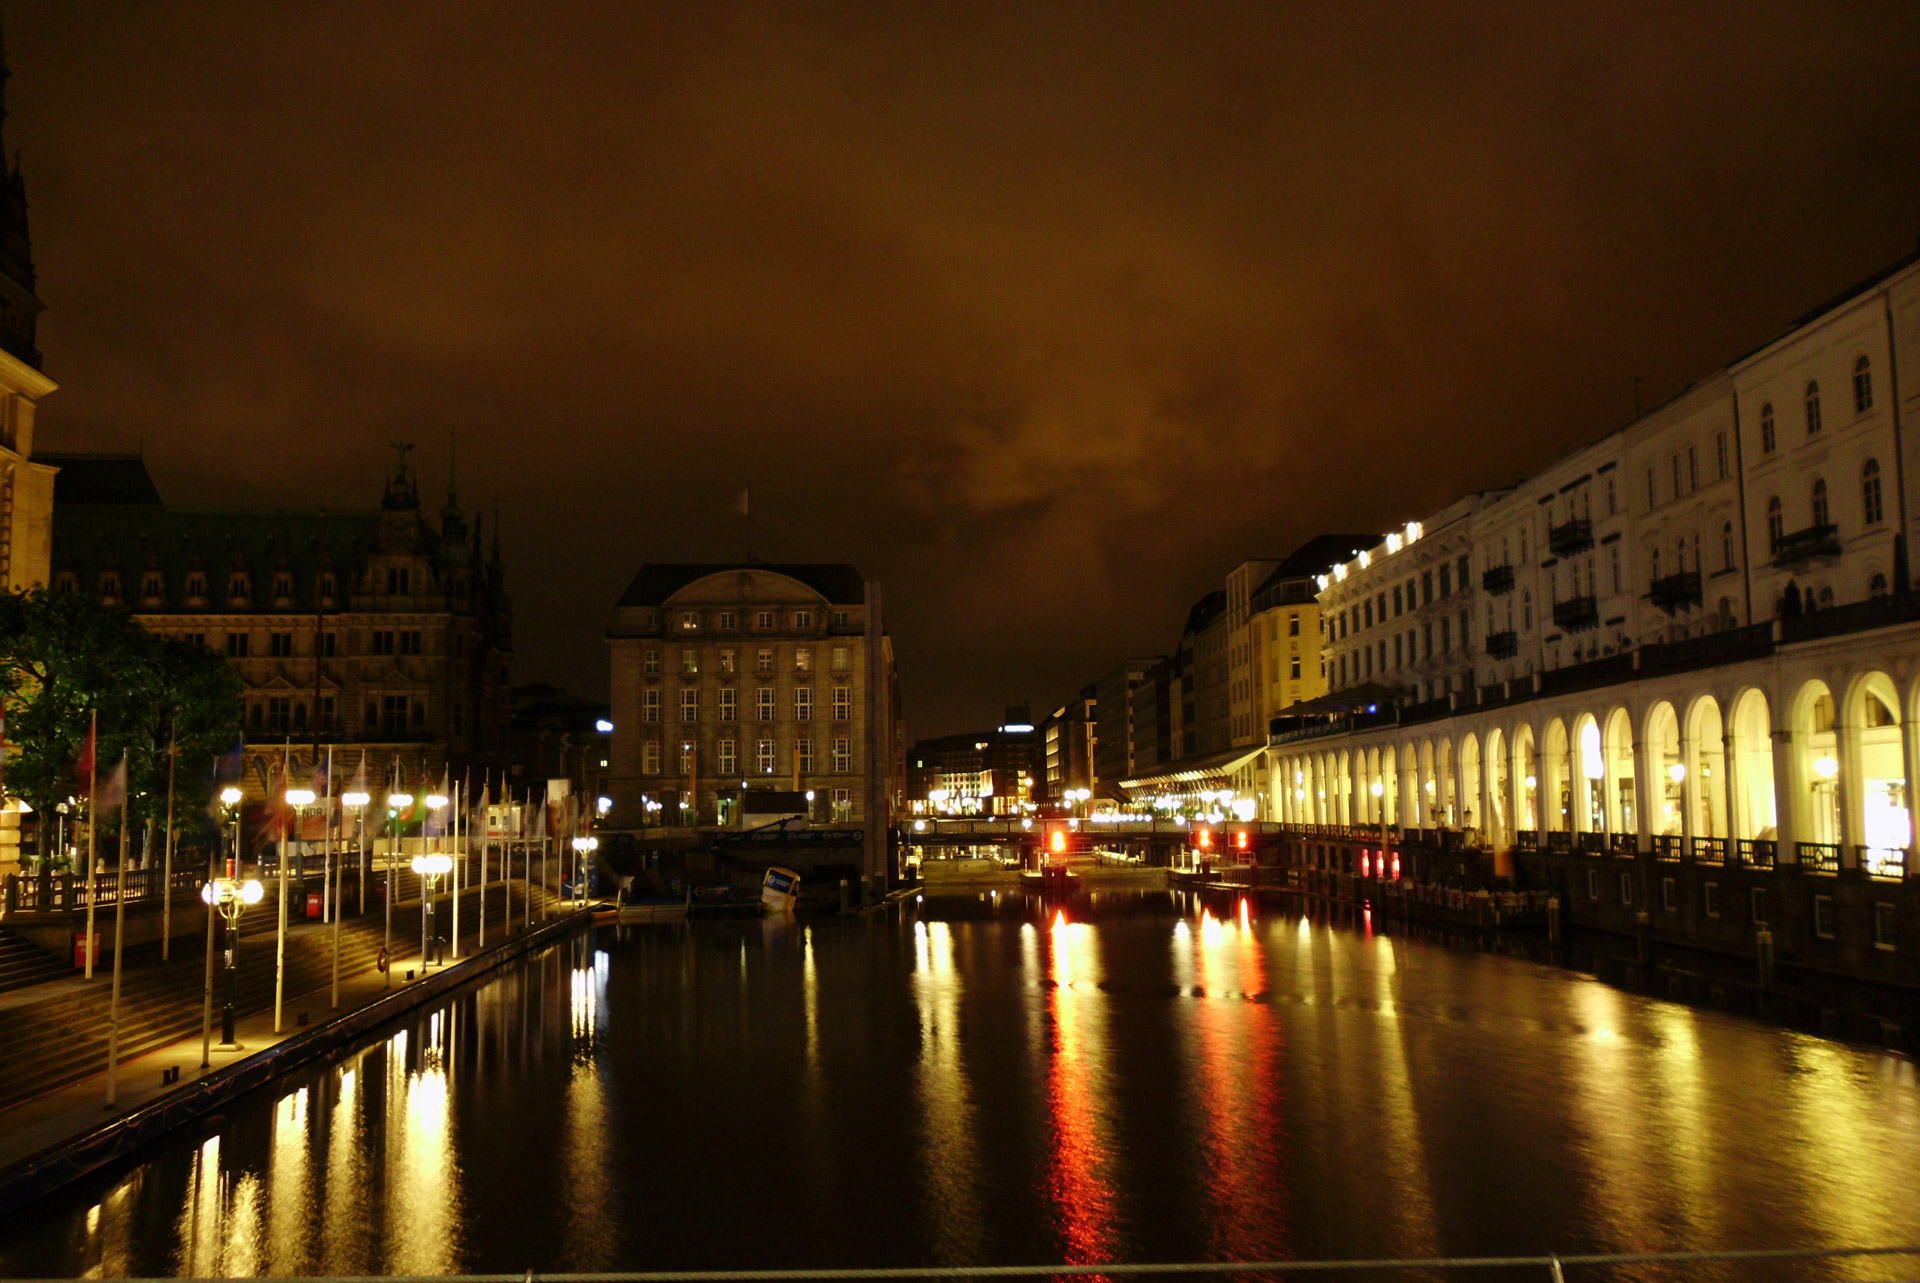 a night shot of the little alster in hamburg